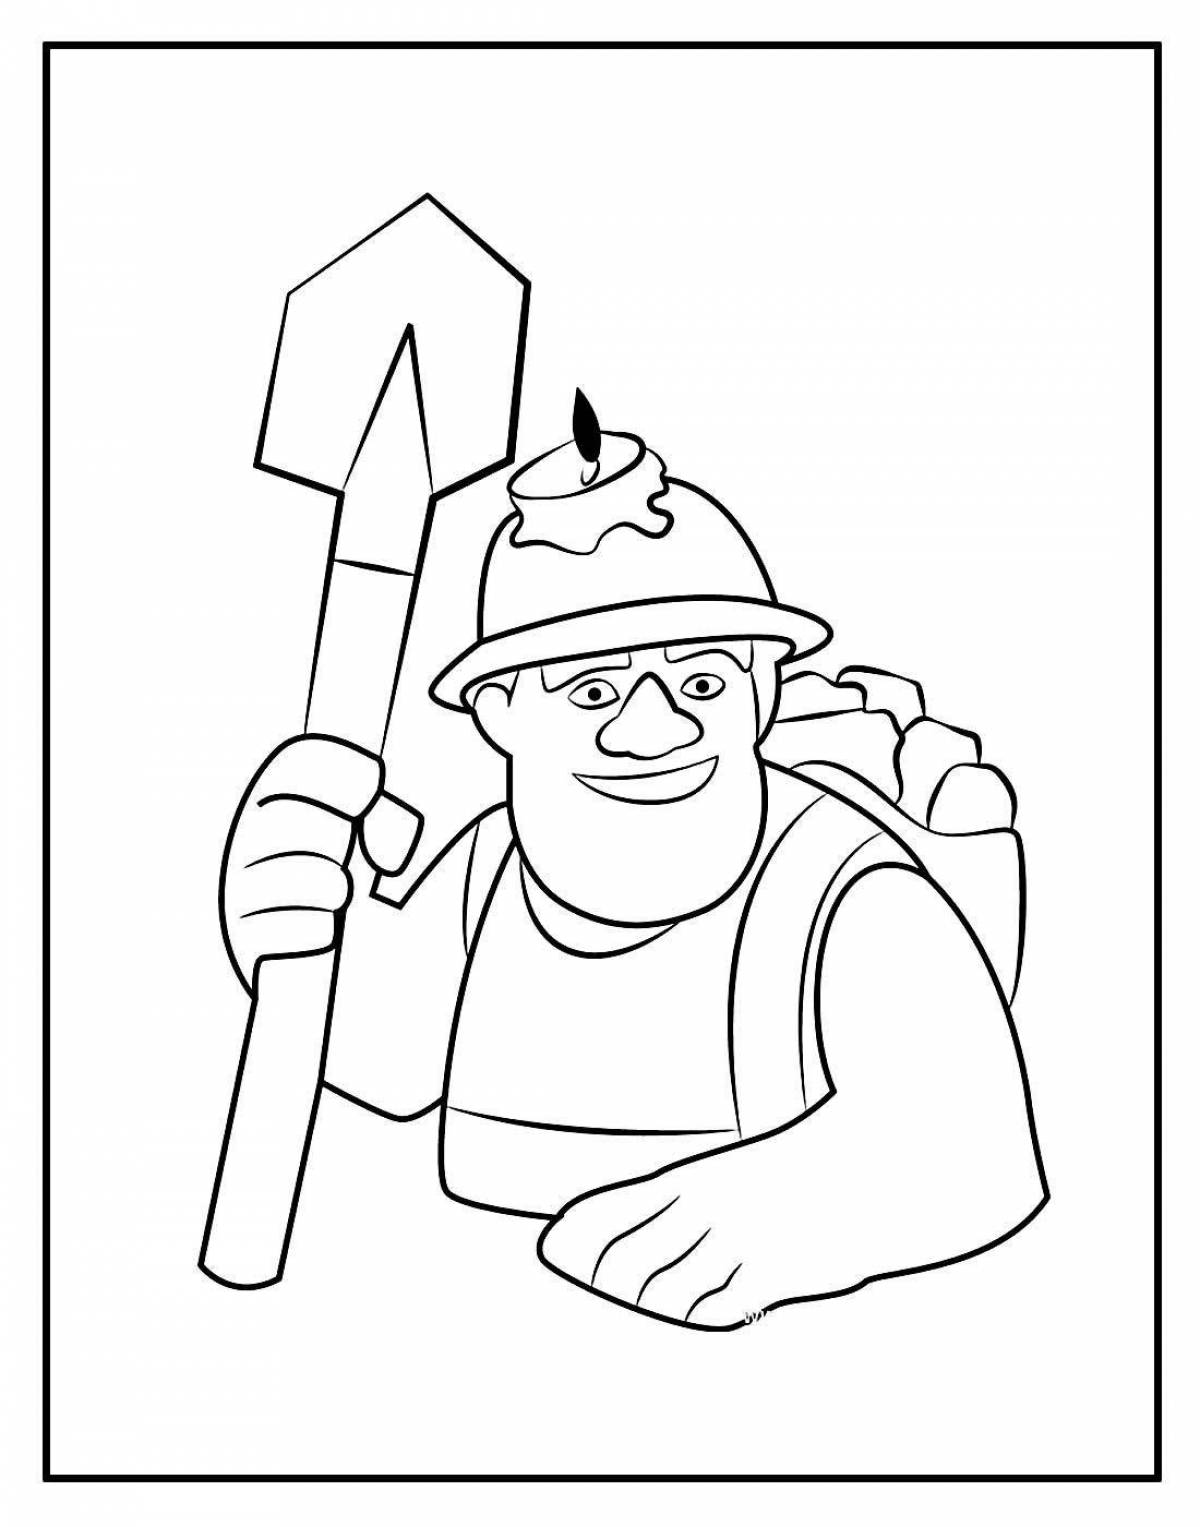 Merry miner coloring for kids